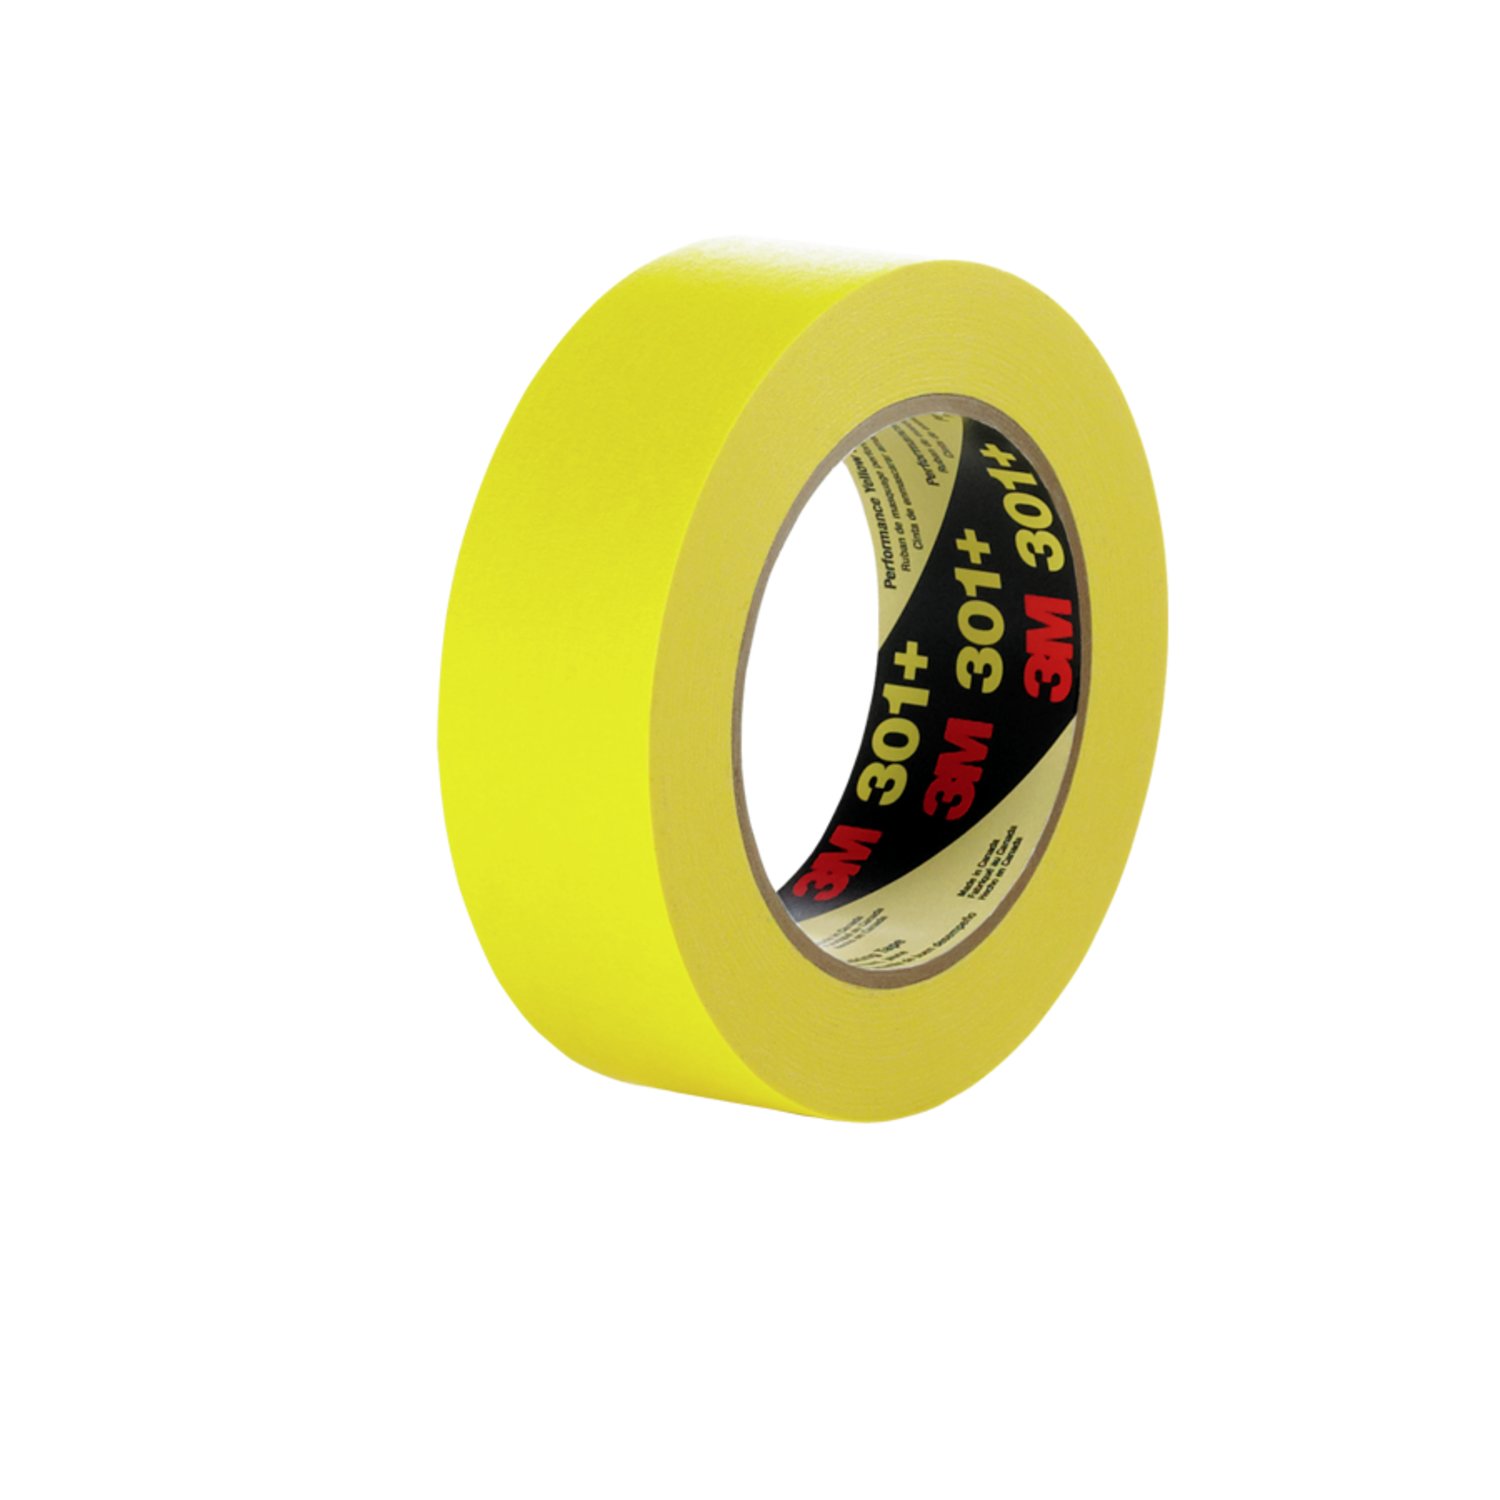 Scotch Contractor Grade Masking Tape, 1.41 inches by 60.1 yards (360 yards  total), 2020, 6 Rolls - Clear Tapes 